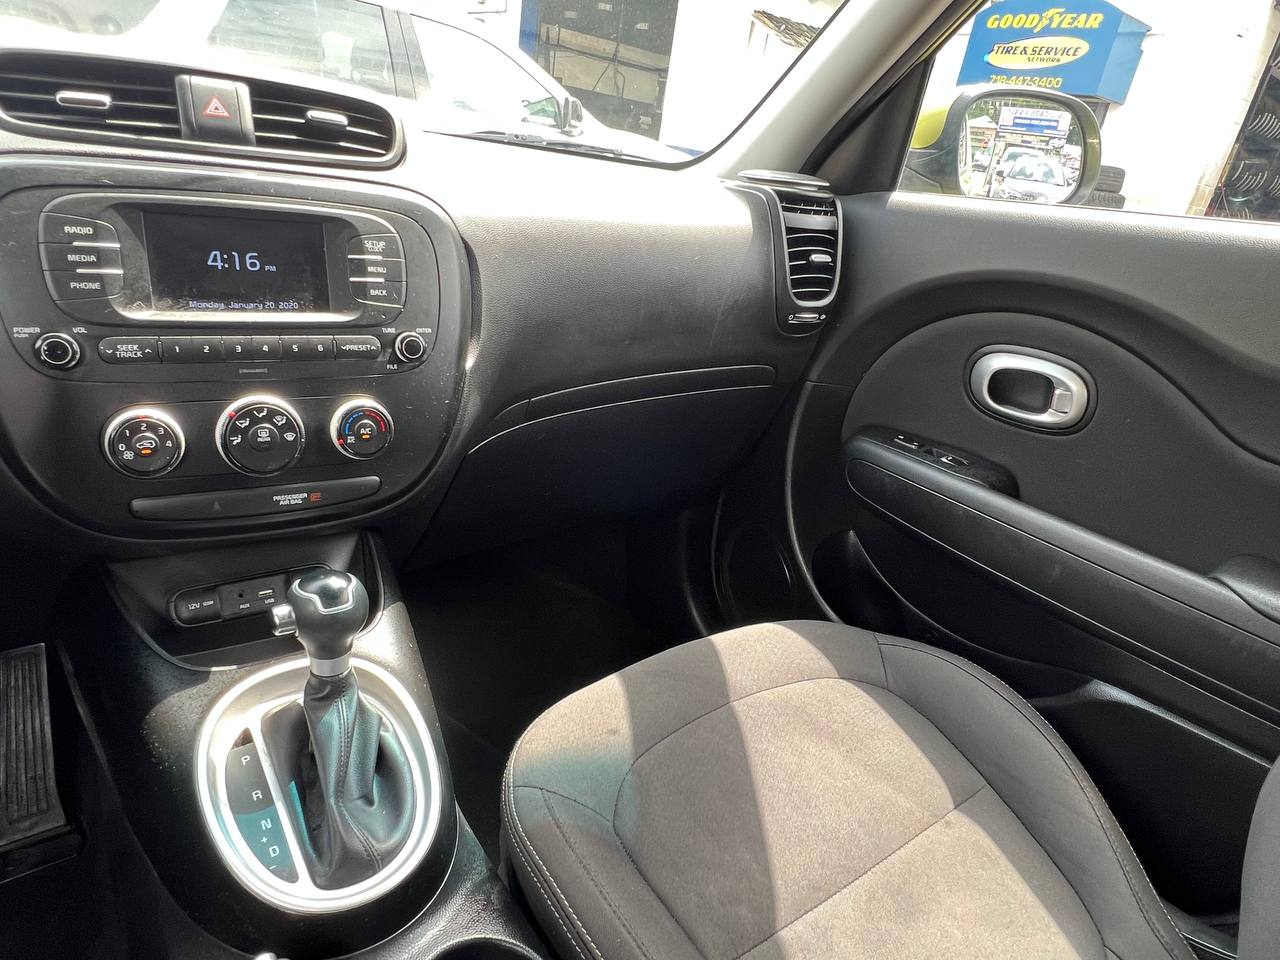 Used - Kia Soul Wagon for sale in Staten Island NY